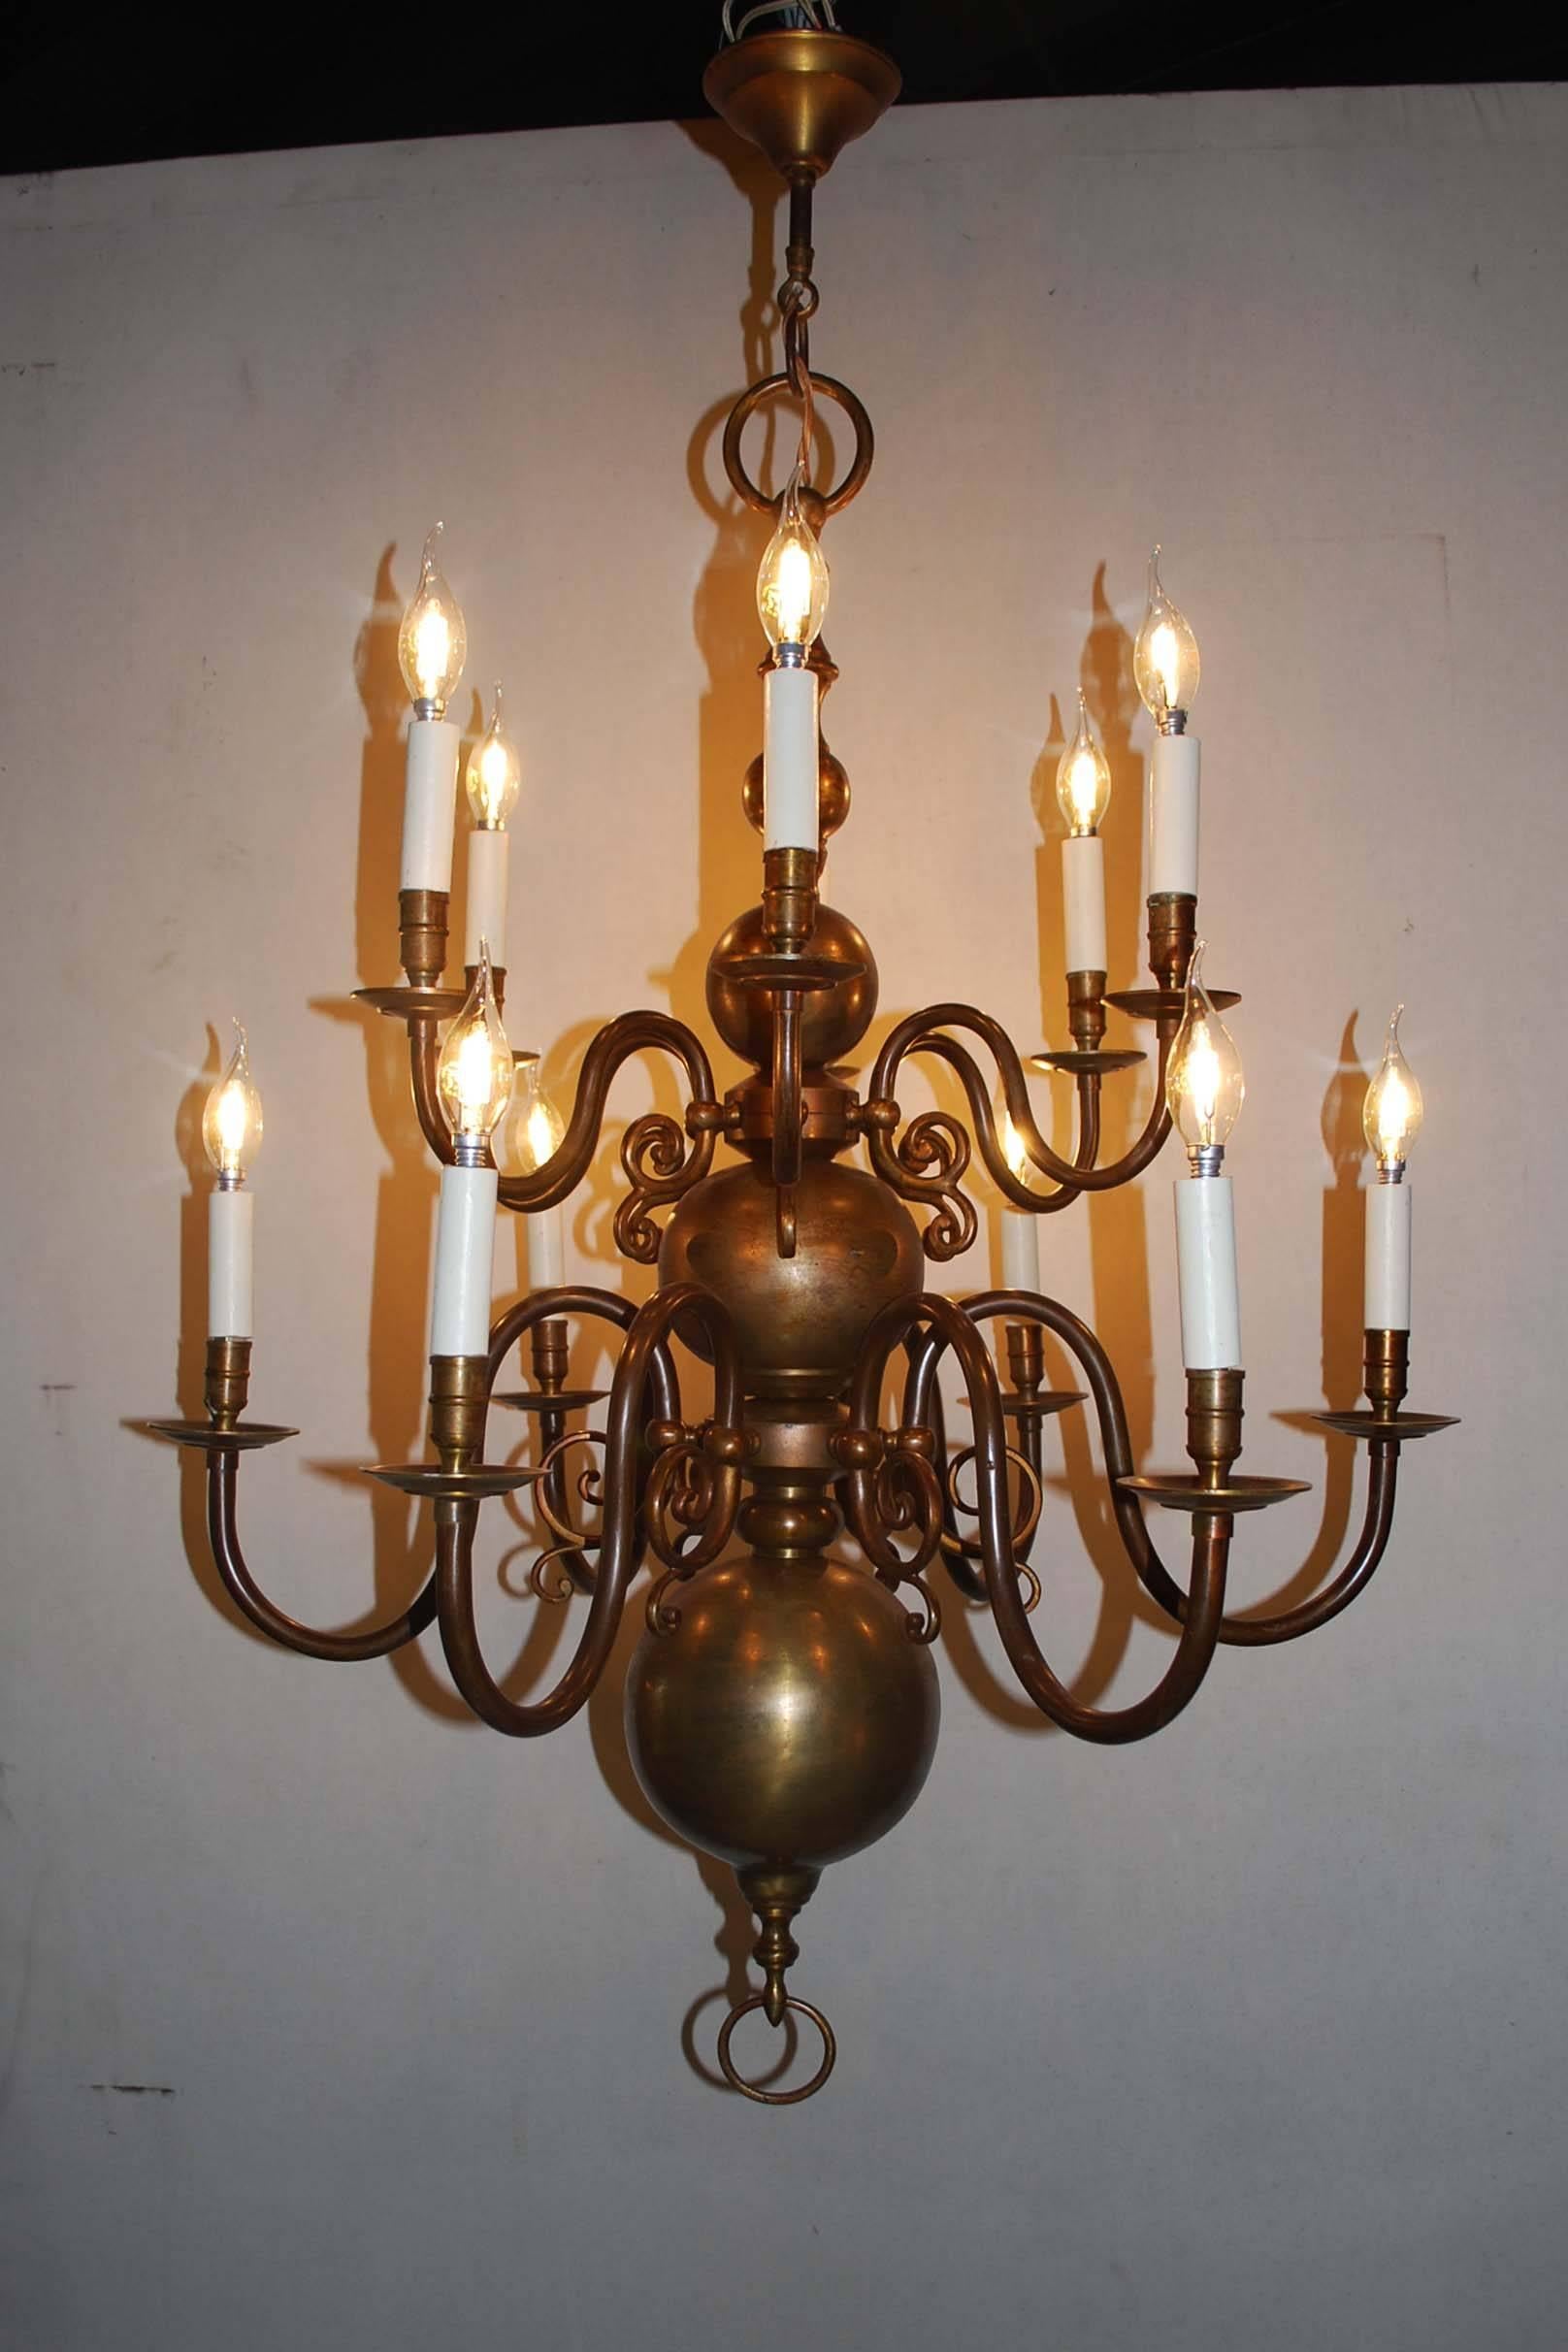 Pair of 20th century brass chandeliers.
Each chandelier has 12 lights.
Originates Holland, dating circa 1920.
(Shipping costs on request, depends on destination).